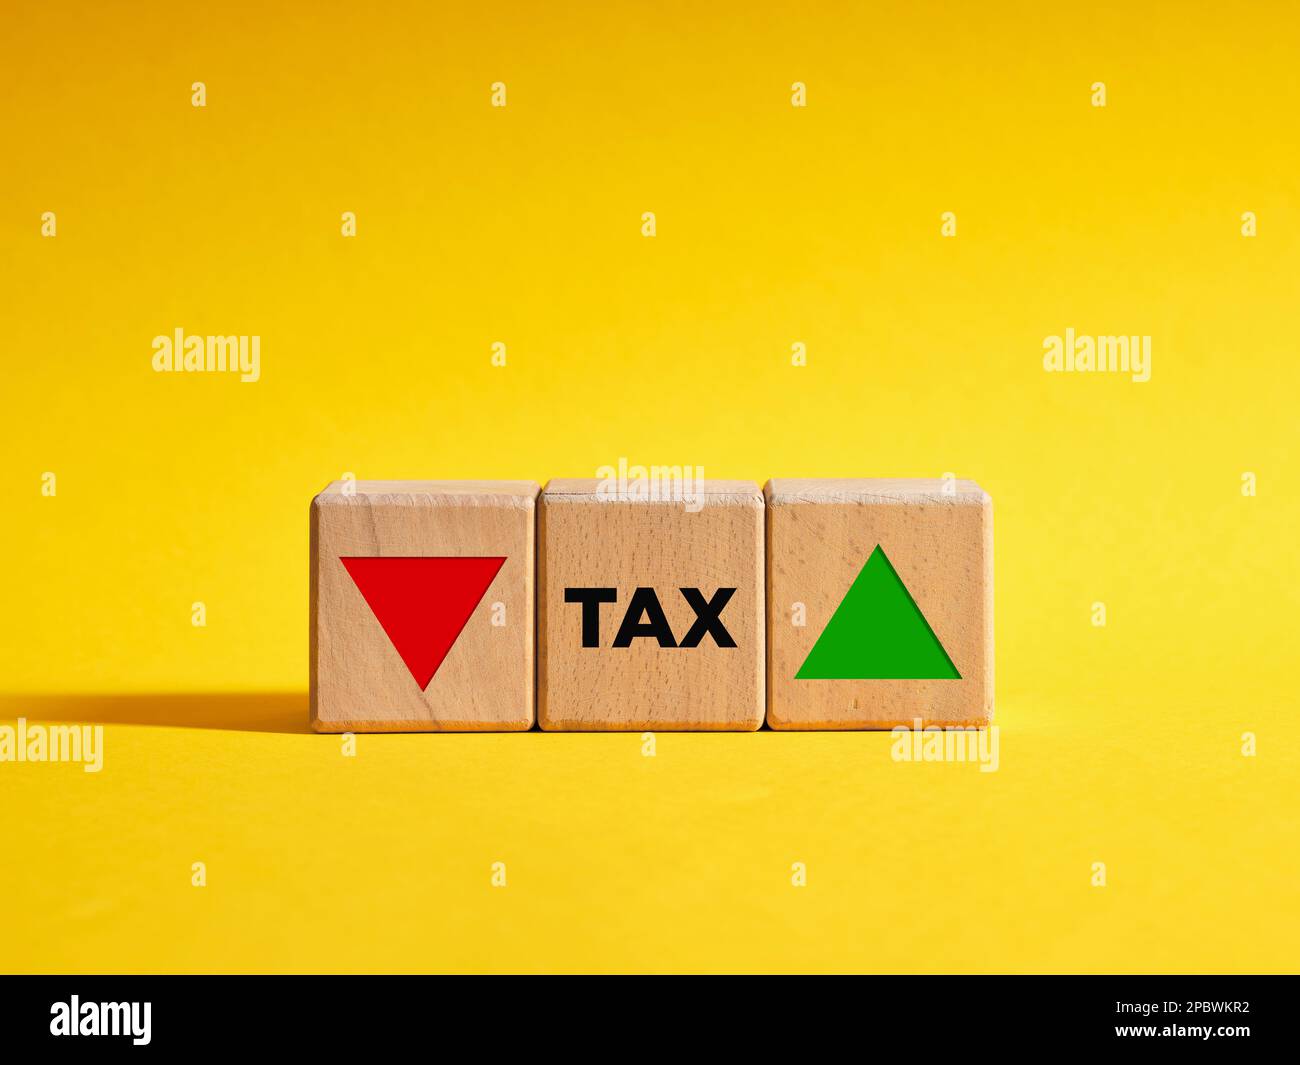 Changing Tax rate trend goes down or up. Taxation business and finance concept. Wooden cubes with the the word Tax and arrows pointing up and down. Stock Photo